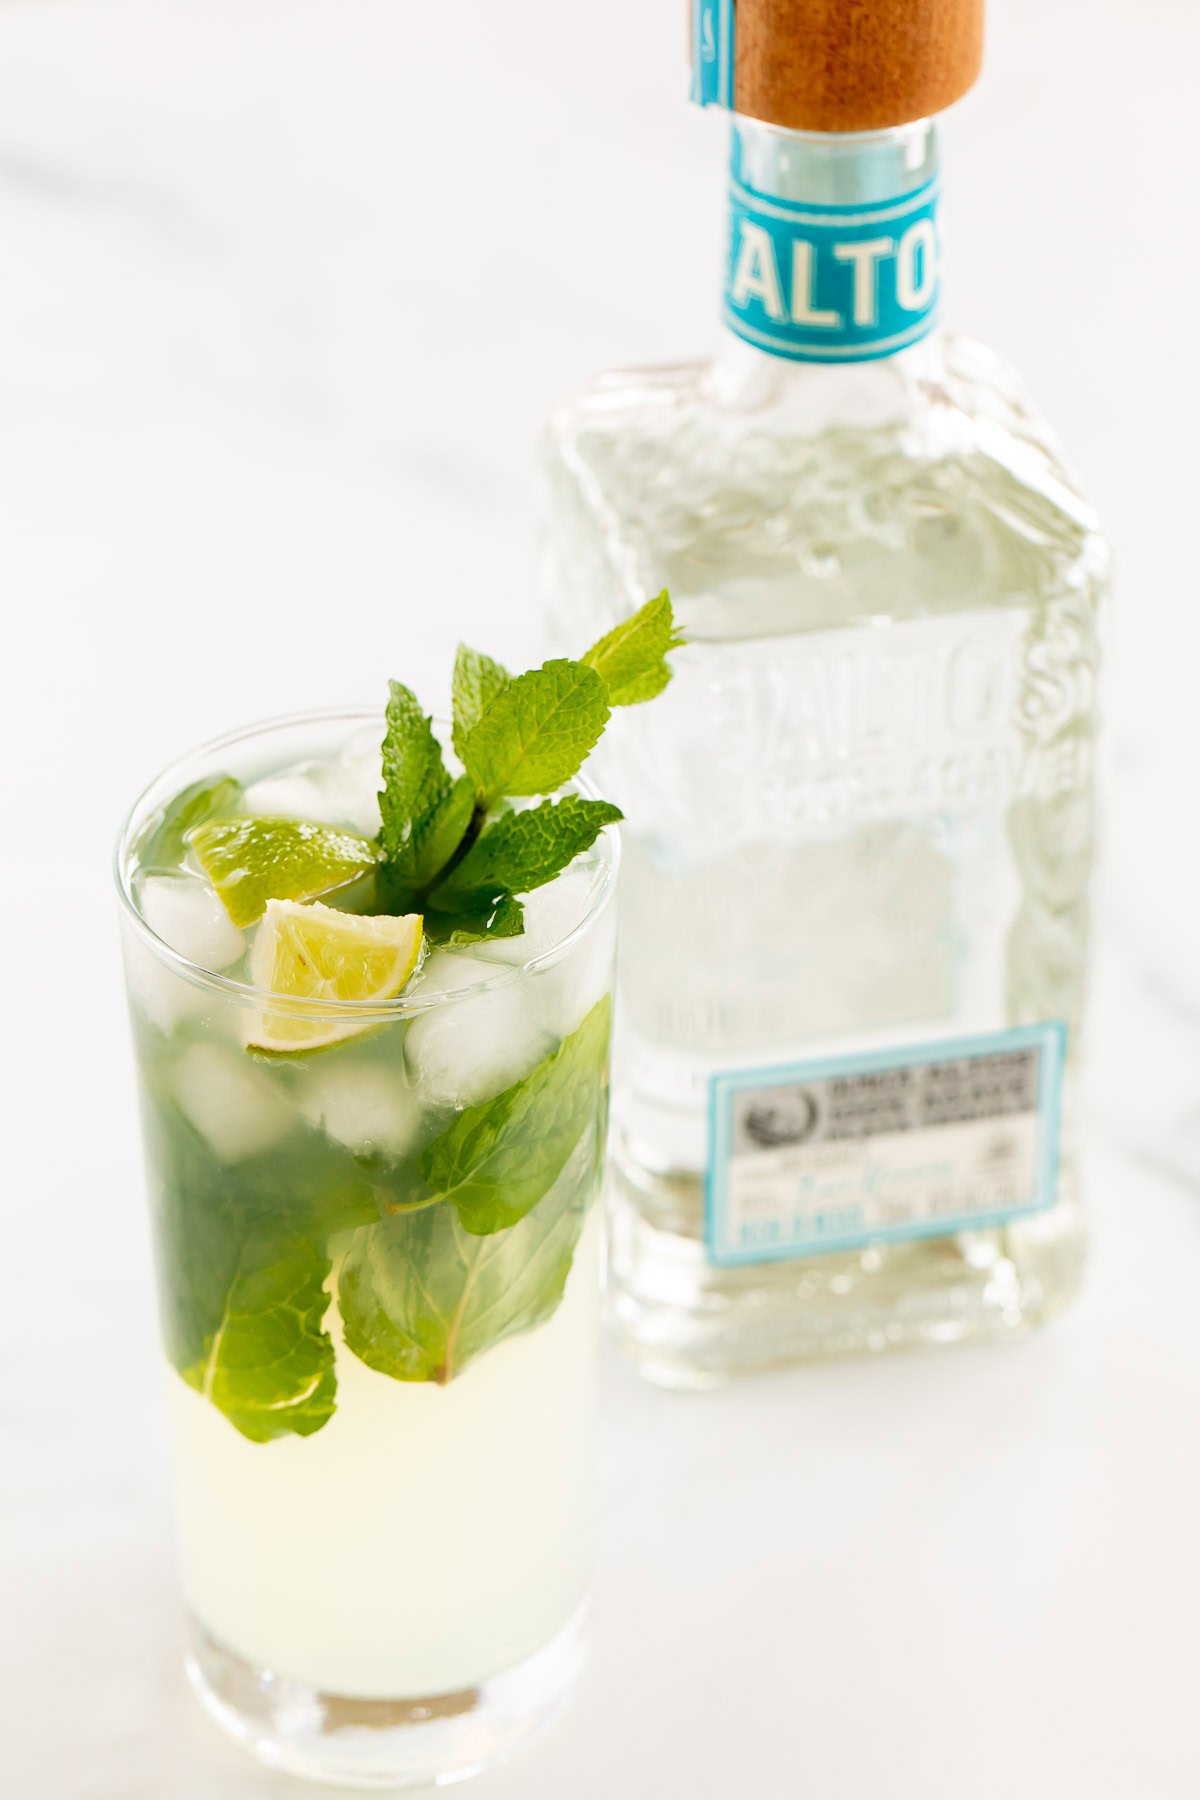 A glass of tequila mojito with lime and mint next to a bottle of altos tequila on a white surface.